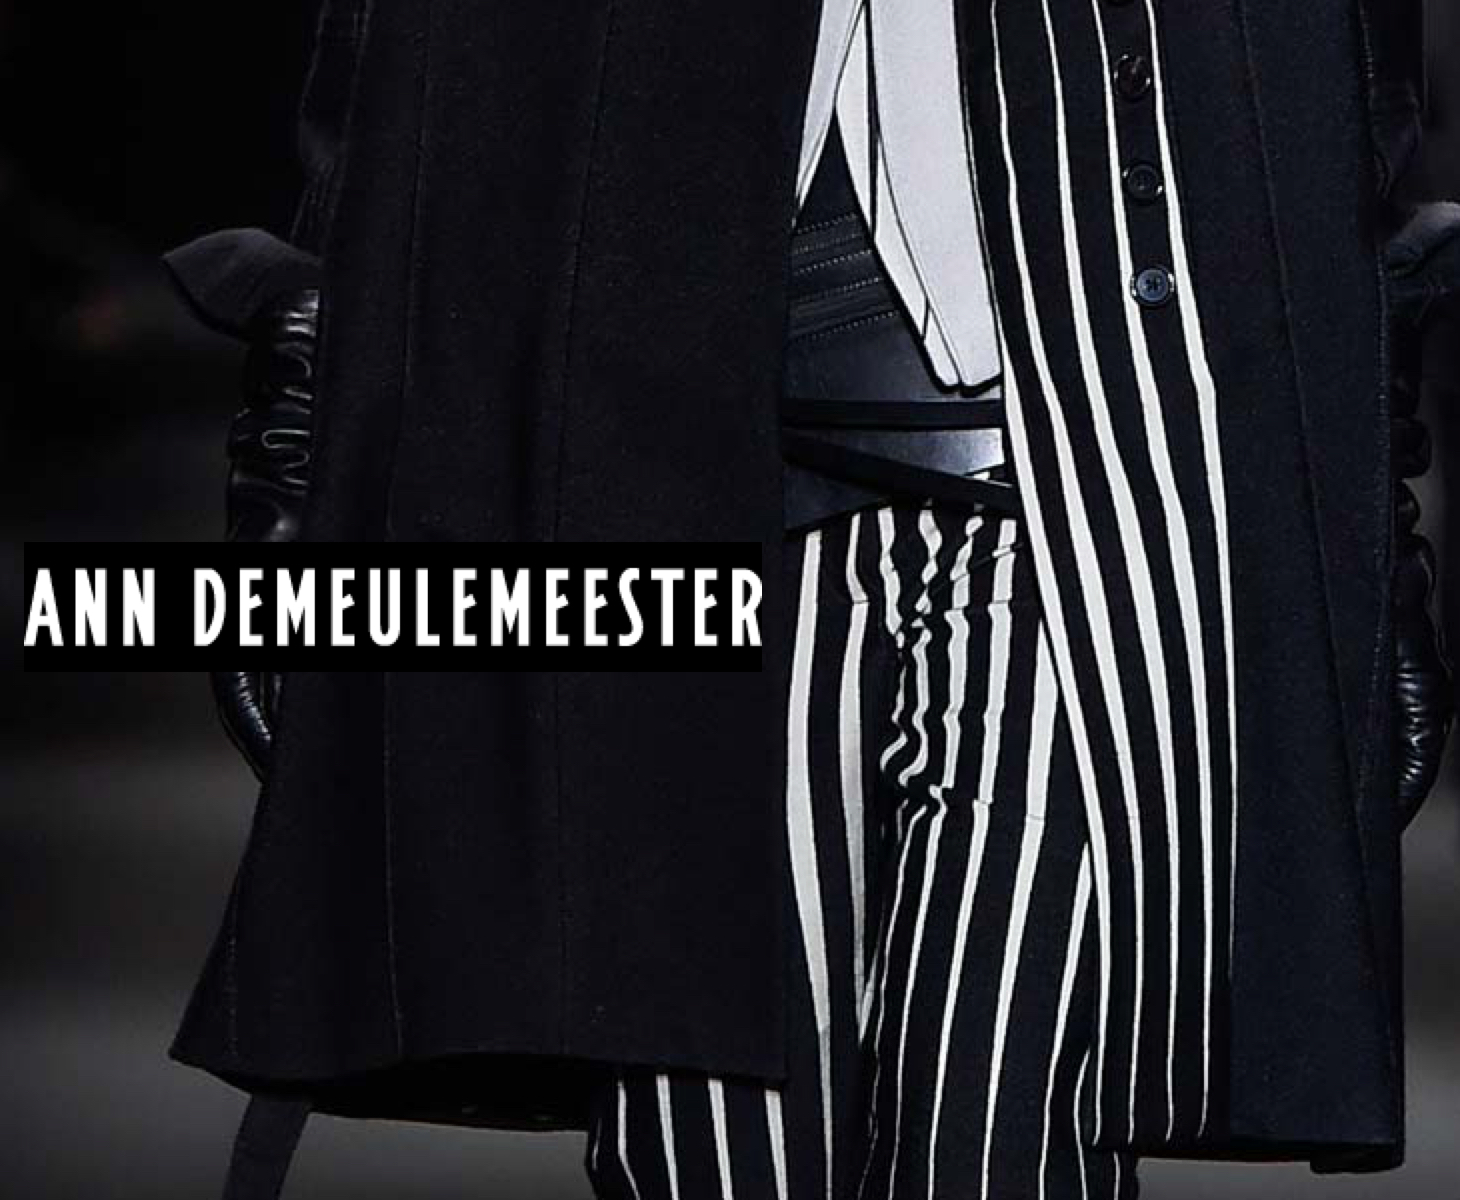 The op art effects of the Ann Demeulemeester Fall collection